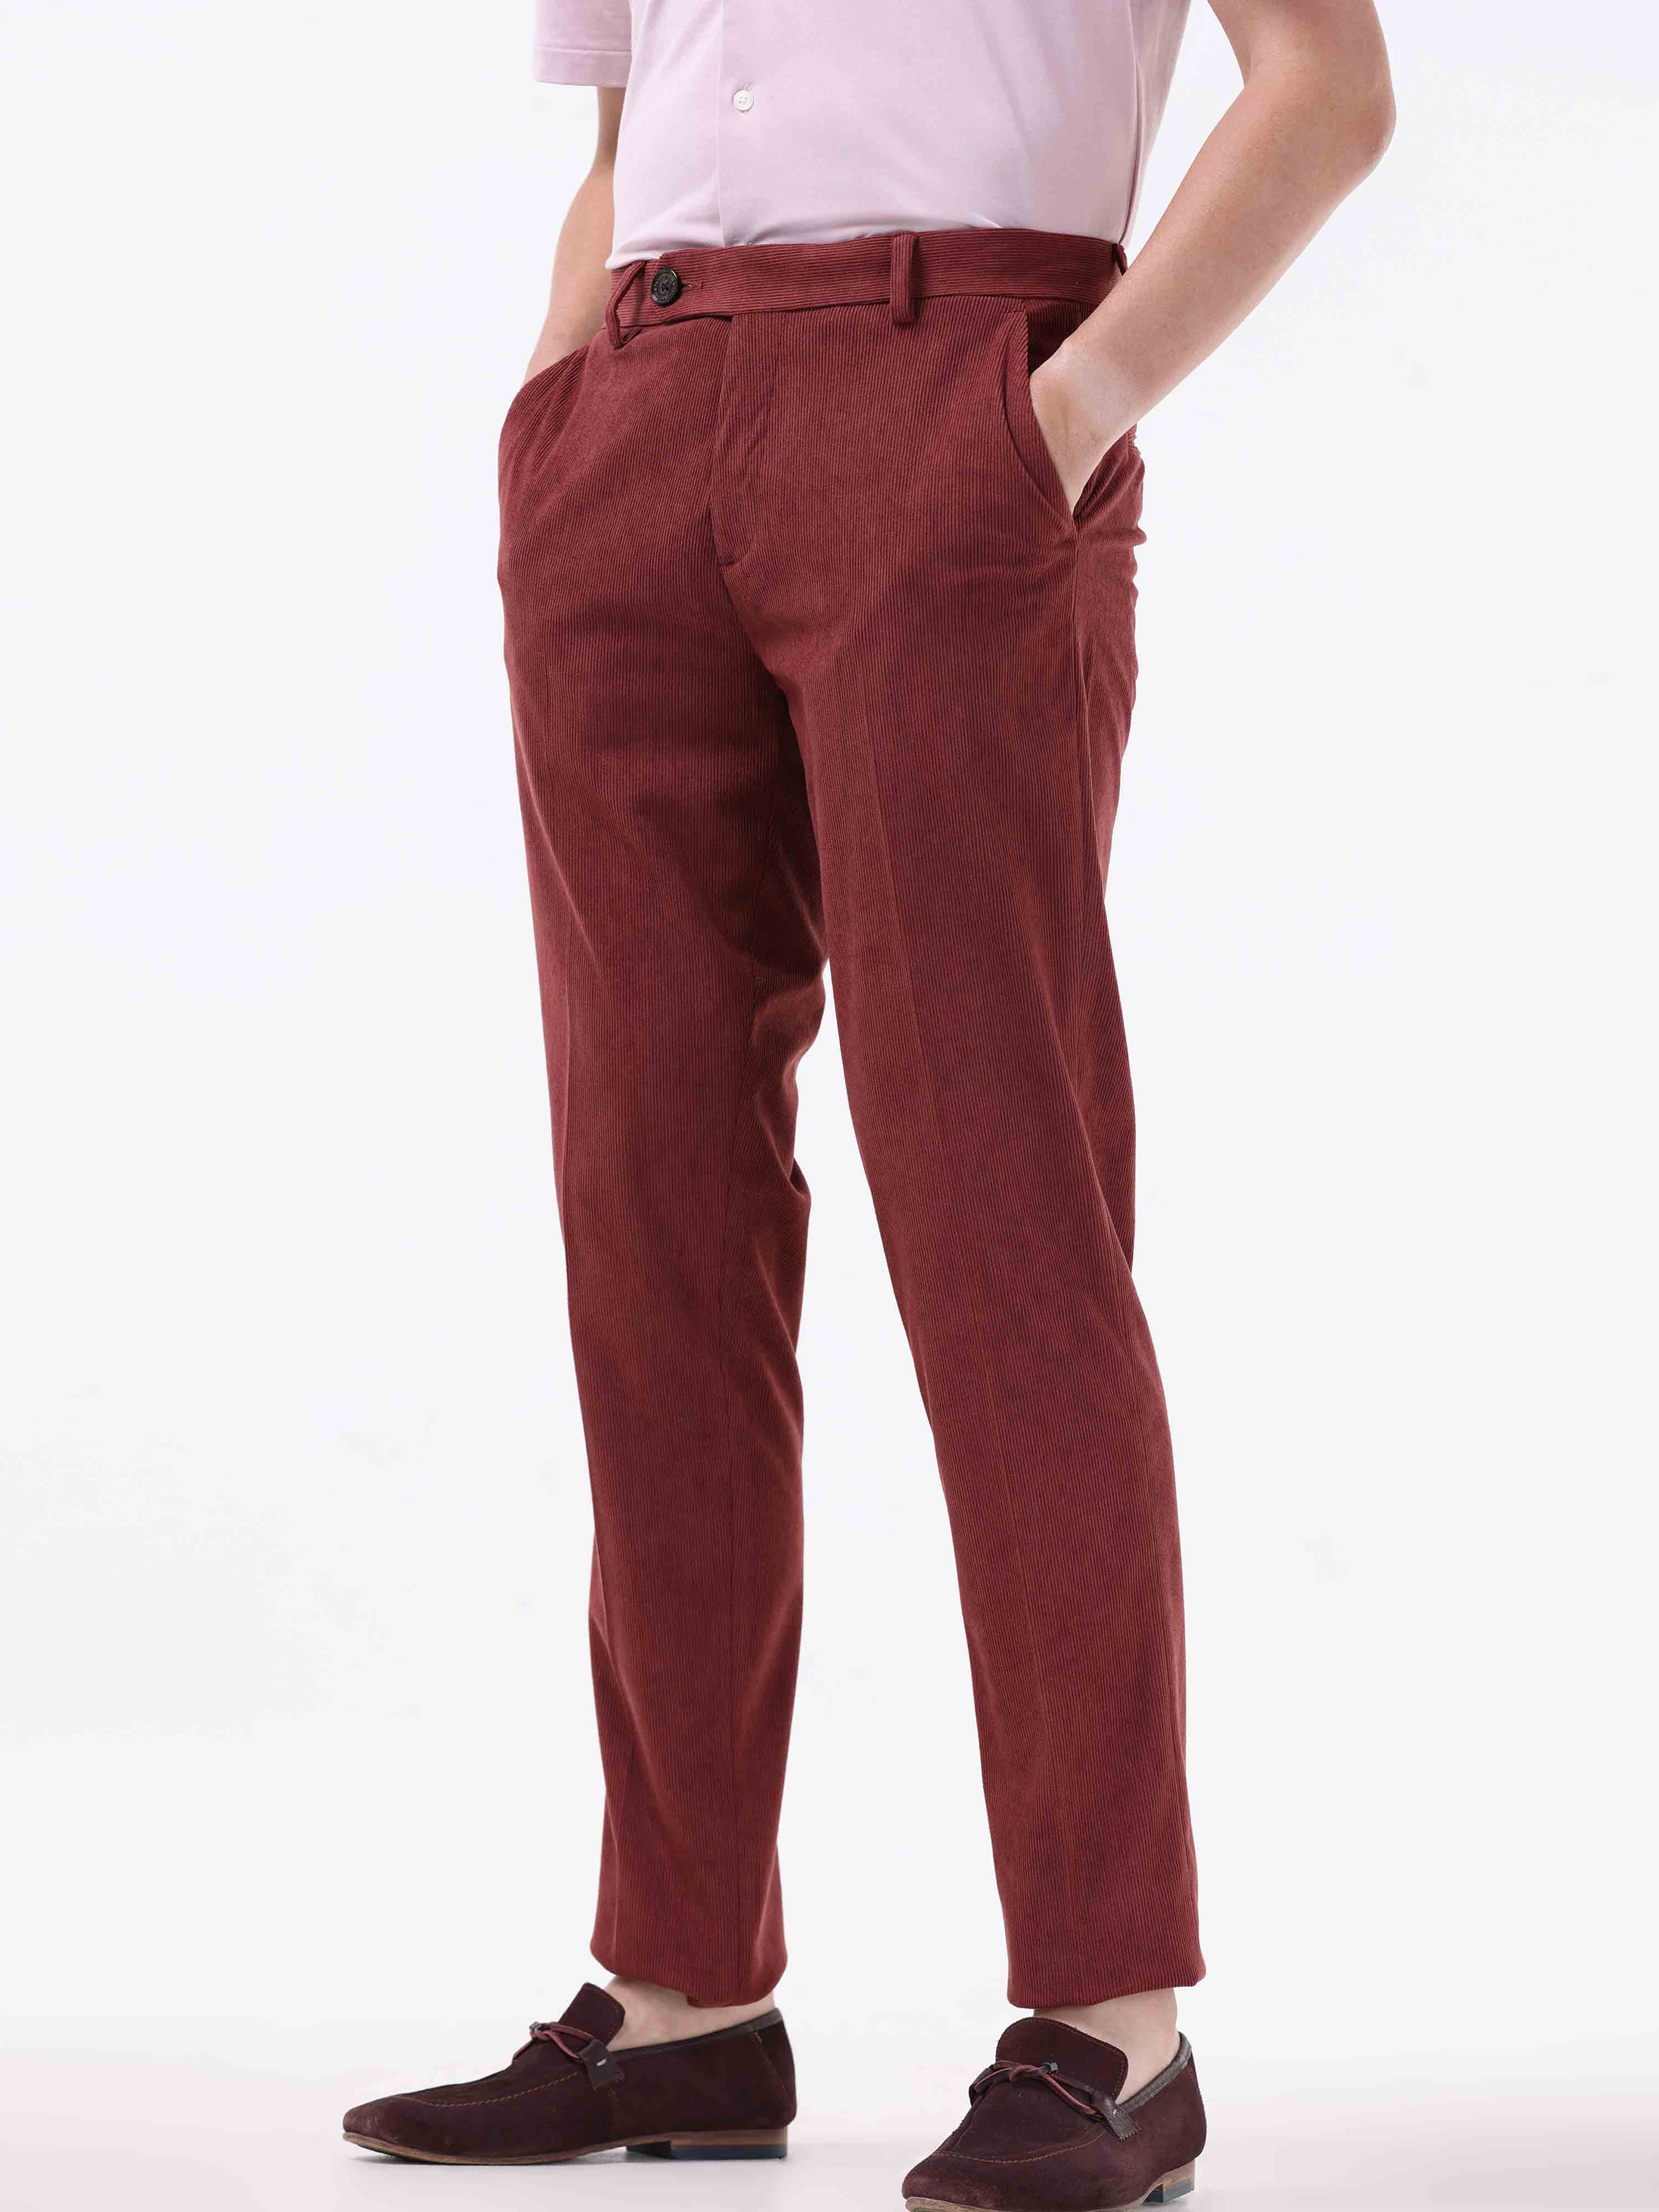 Mens Corduroy Trousers Made to measure Cord Trousers for men, Made to  Measure Alexanders of London